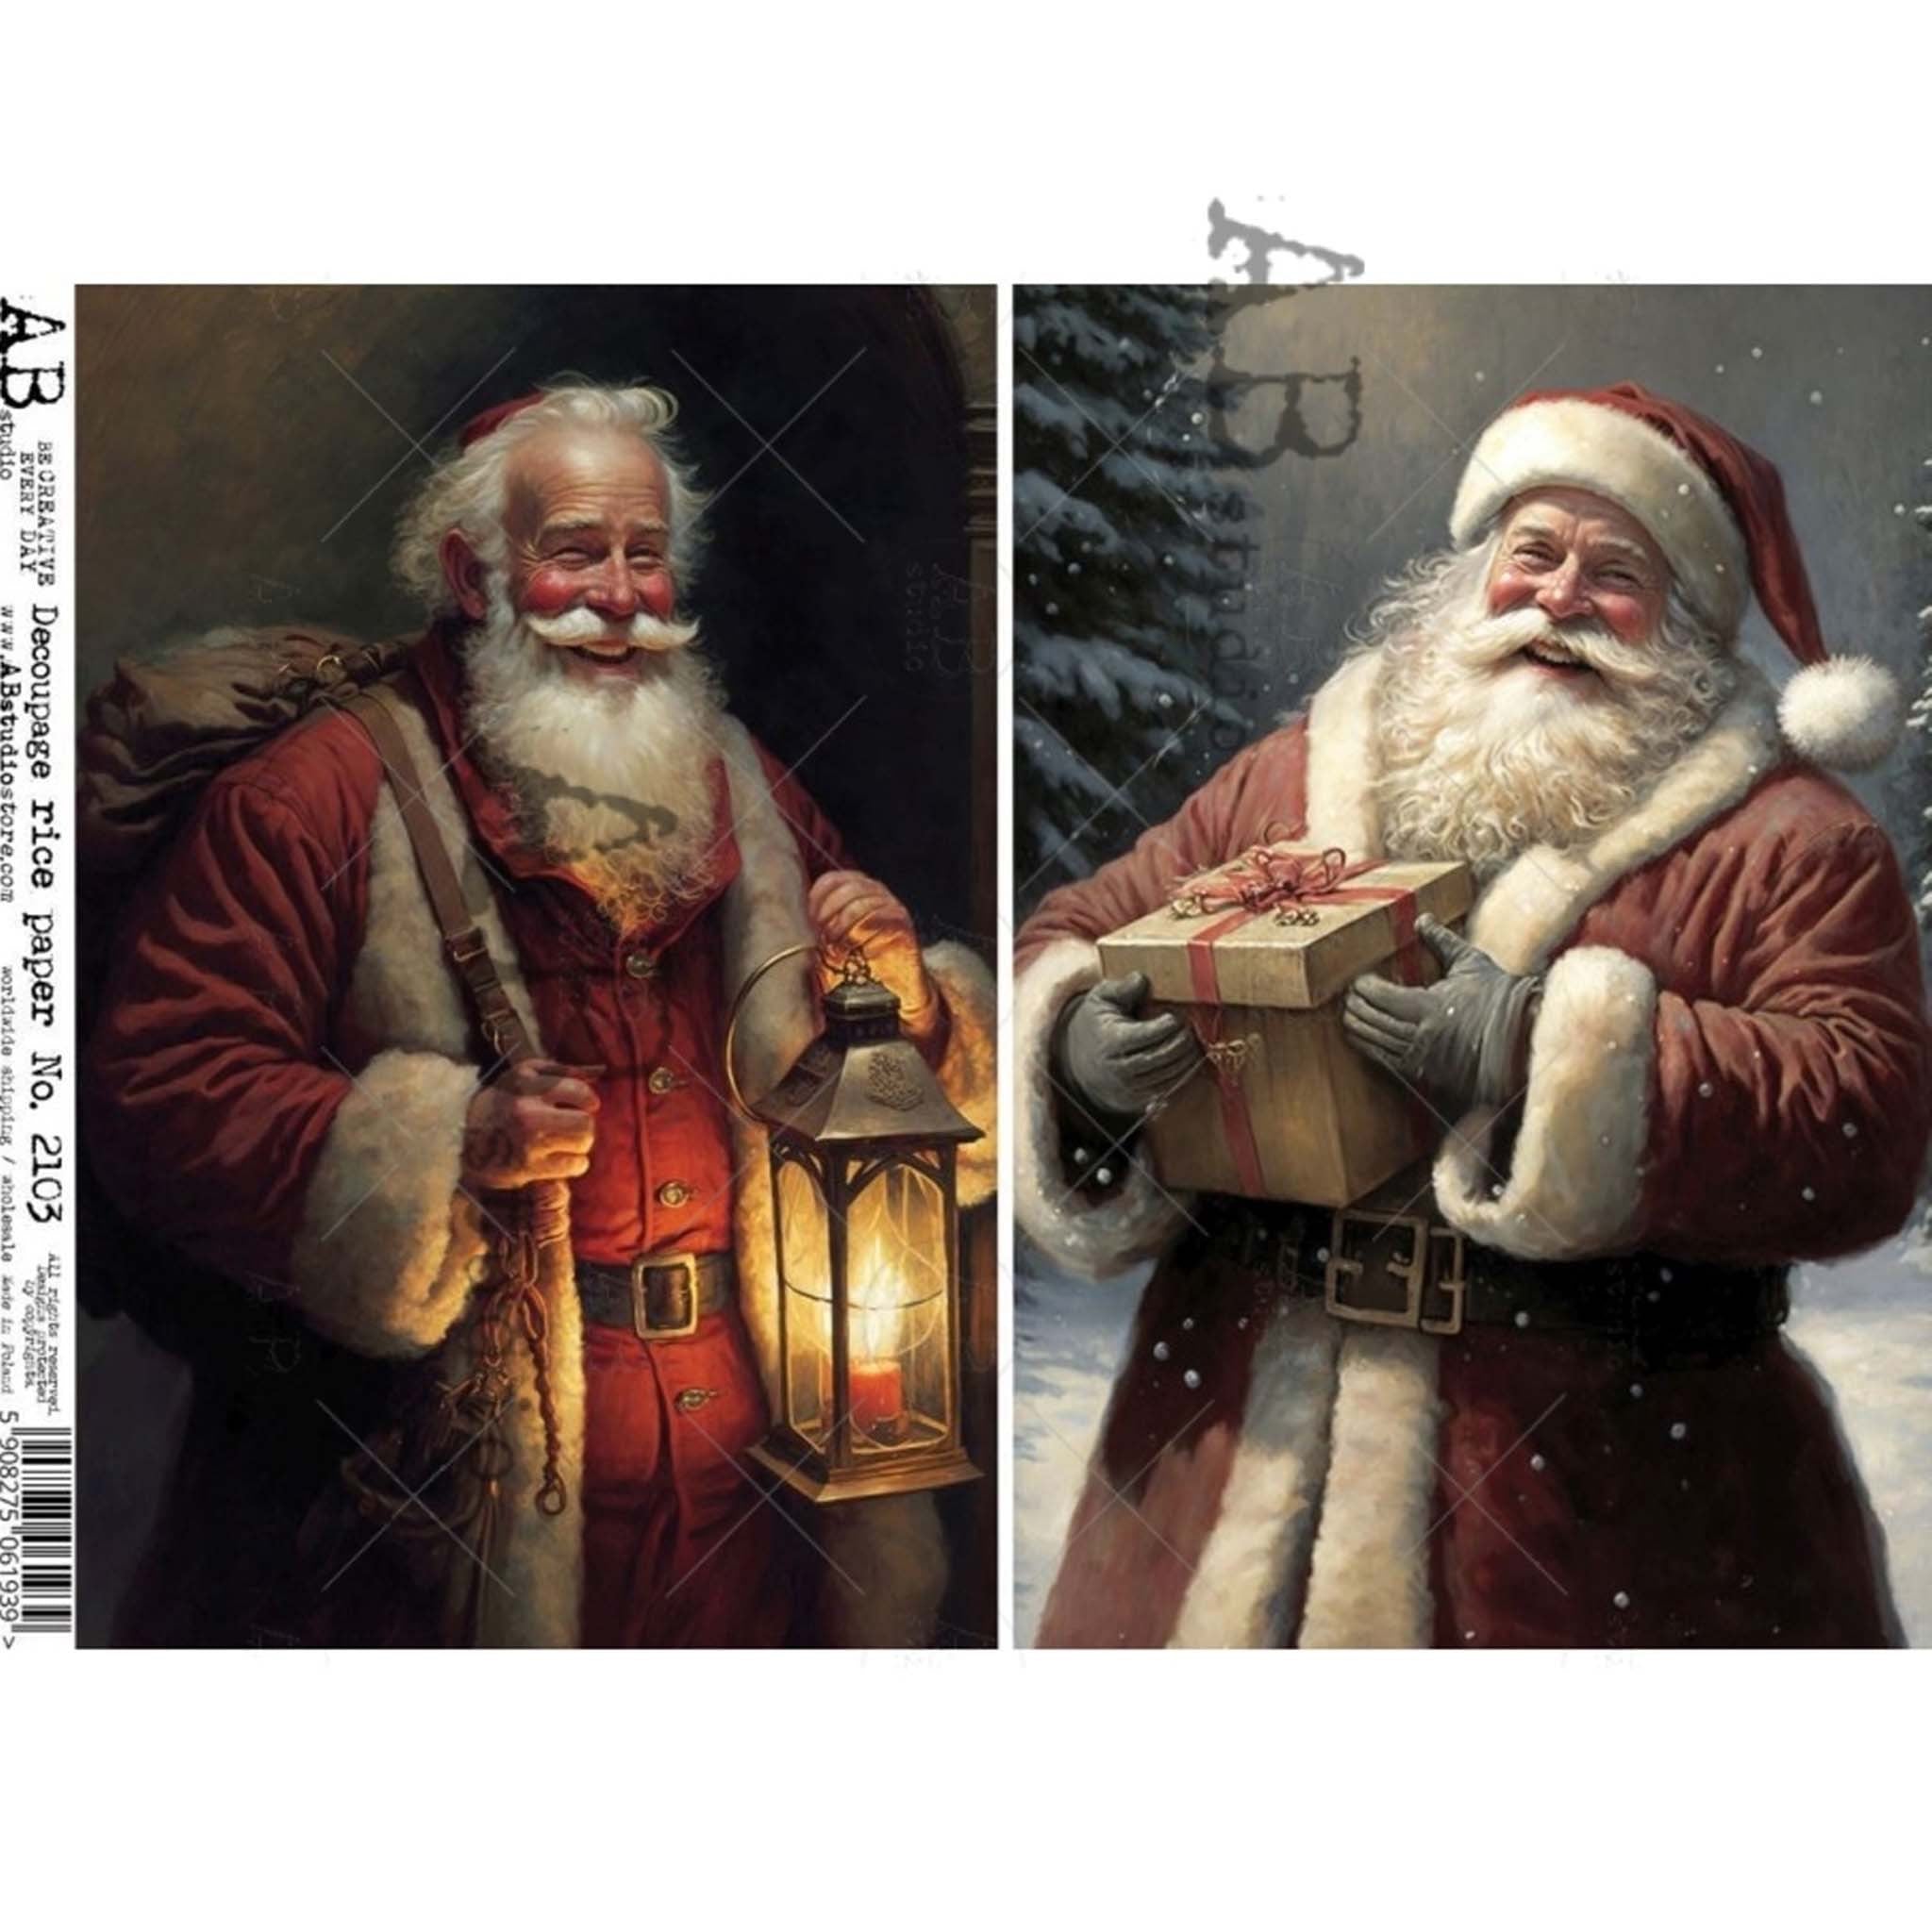 A4 rice paper design of 2 scenes of realistic style portraits of grinning Santas. One is holding a lantern and gift sack. The other is outside in the snow holding a present. White borders are on the top and bottom.